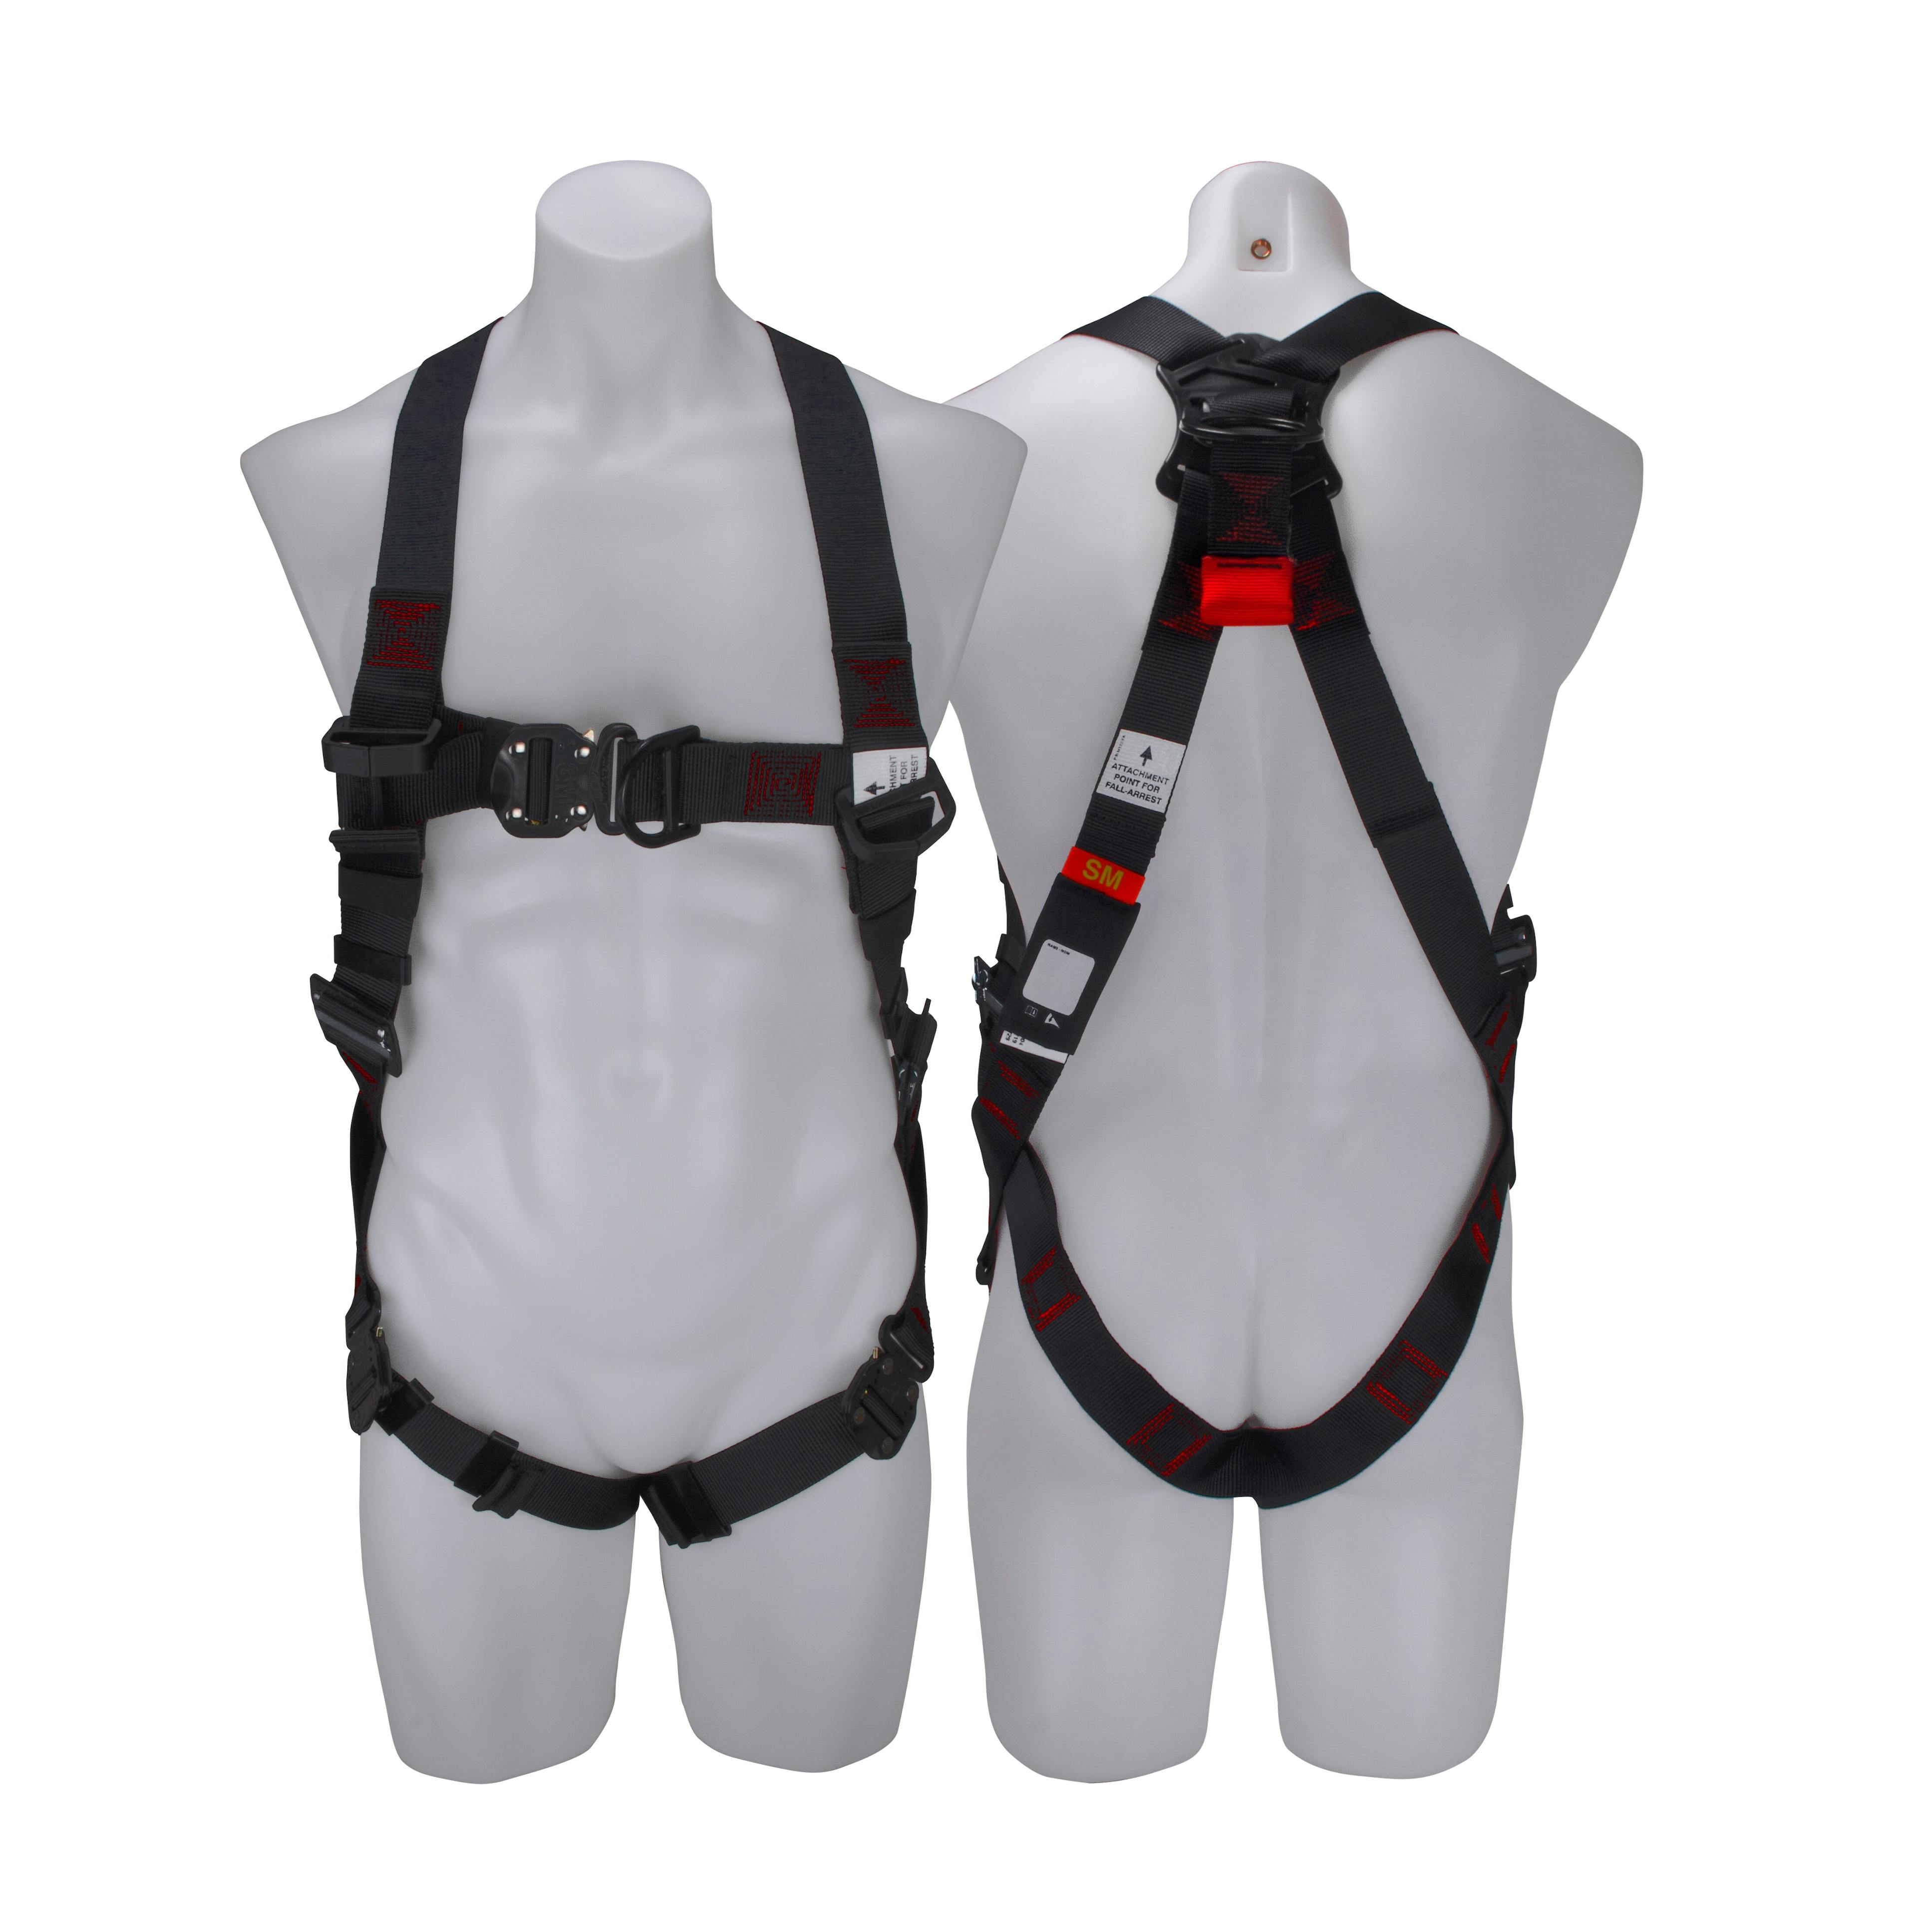 3M™ PROTECTA® X Riggers Harness 1161674, Red and Black, Large, 1 EA/Case